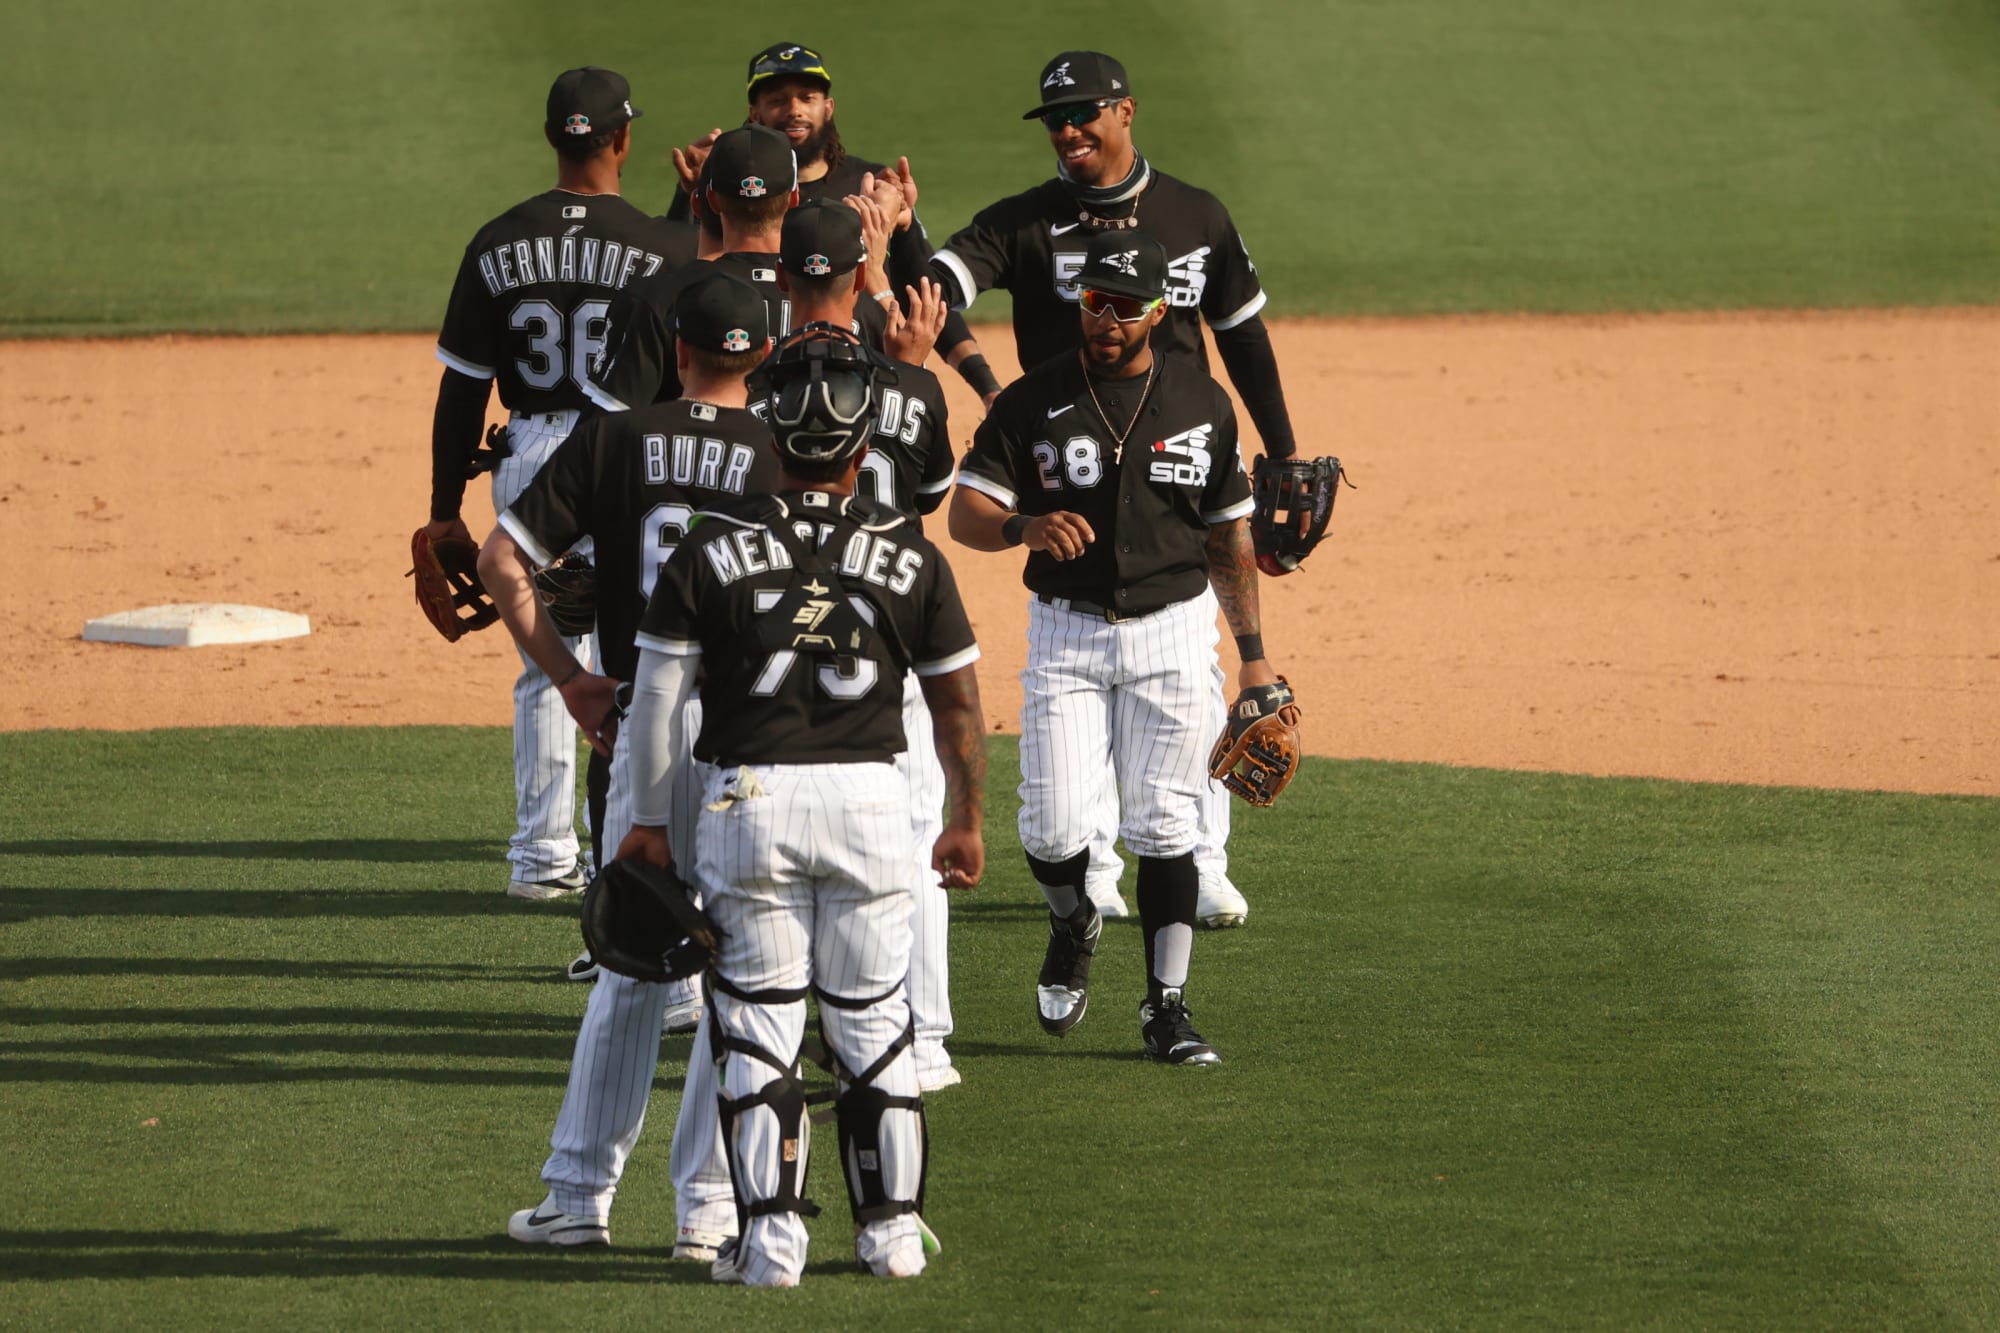 Chicago White Sox projected lineup after Eloy Jimenez injury